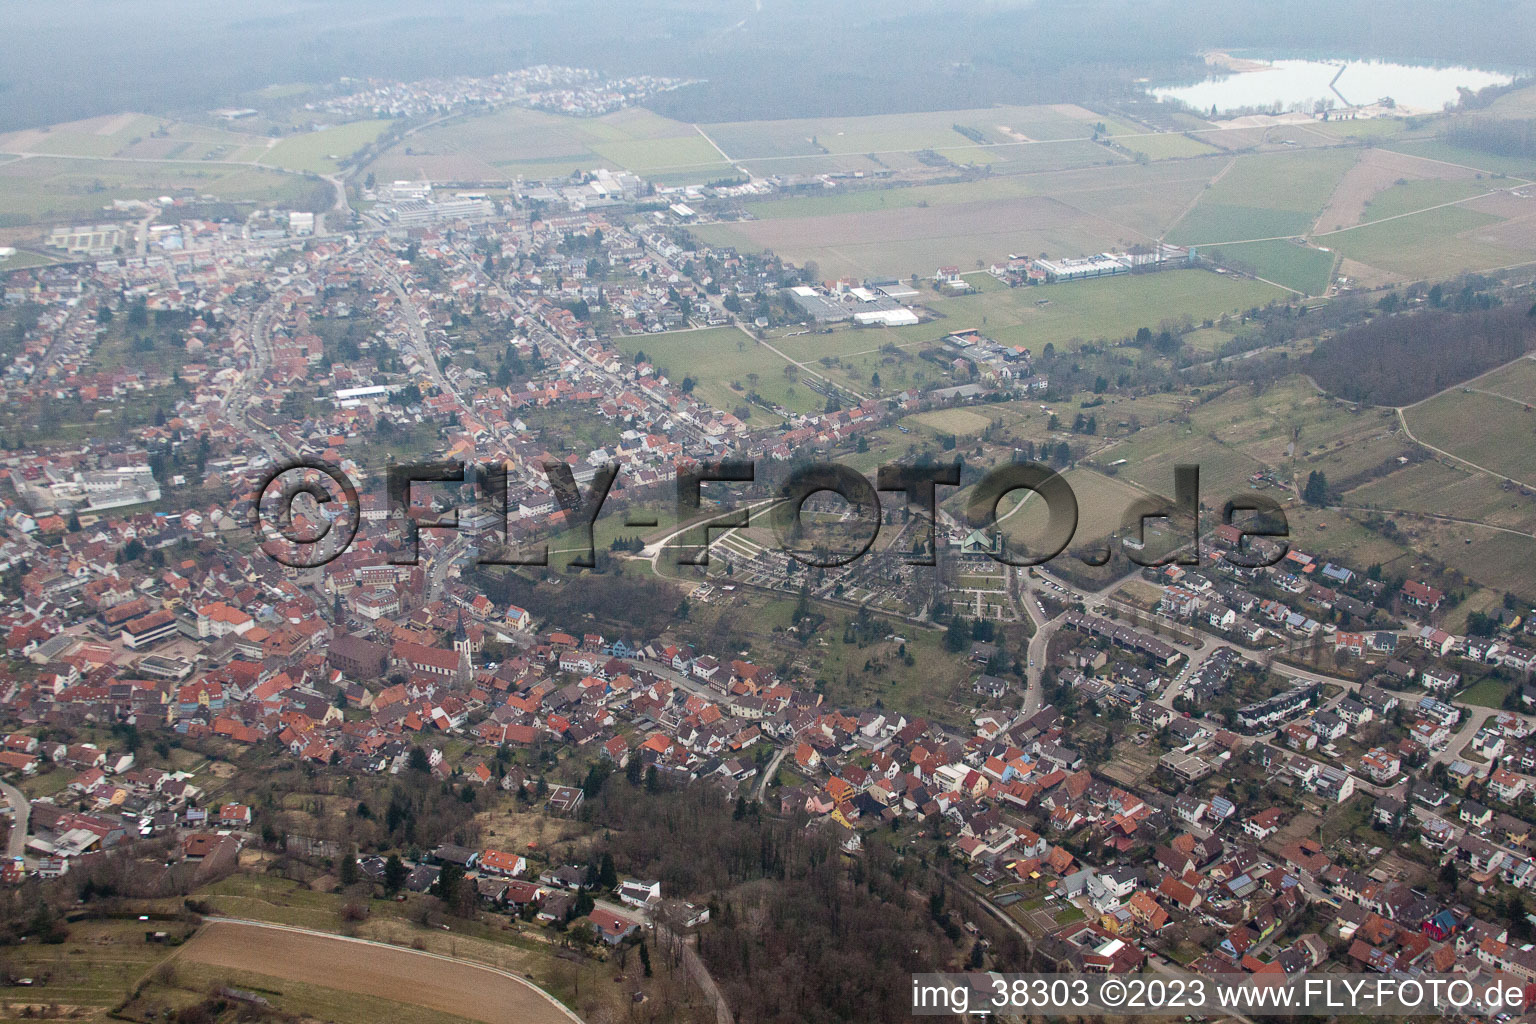 Weingarten in the state Baden-Wuerttemberg, Germany seen from above